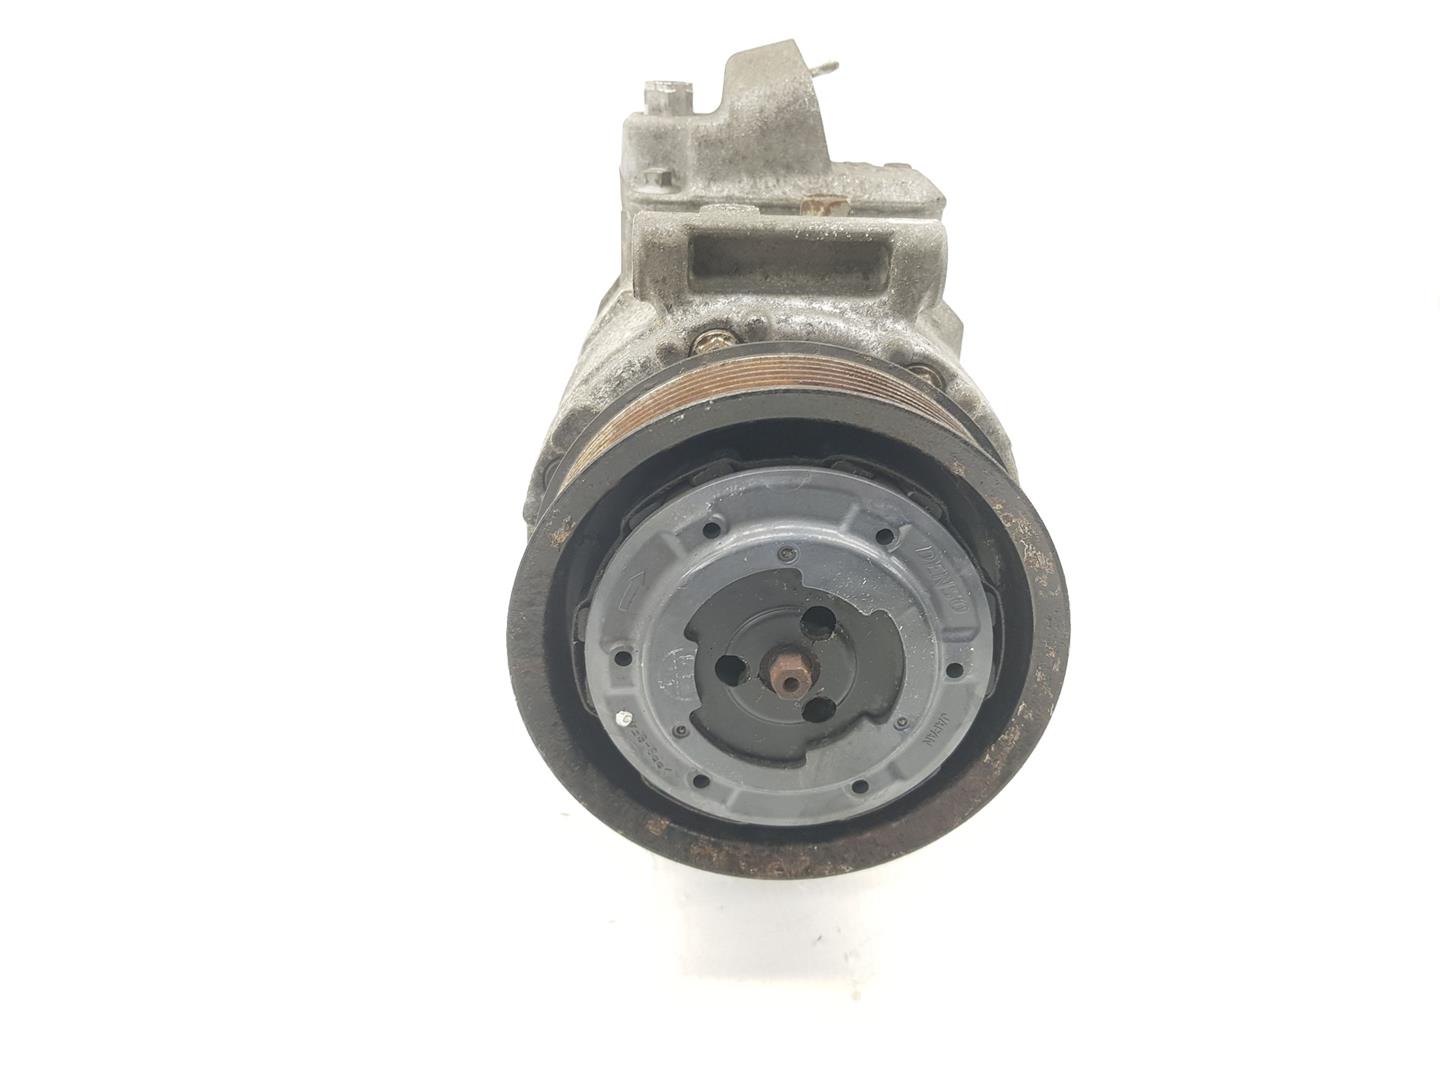 IVECO Discovery 3 generation (2004-2009) Aircondition pumpe JPB000183, JPB000183, 2223MH 24230362